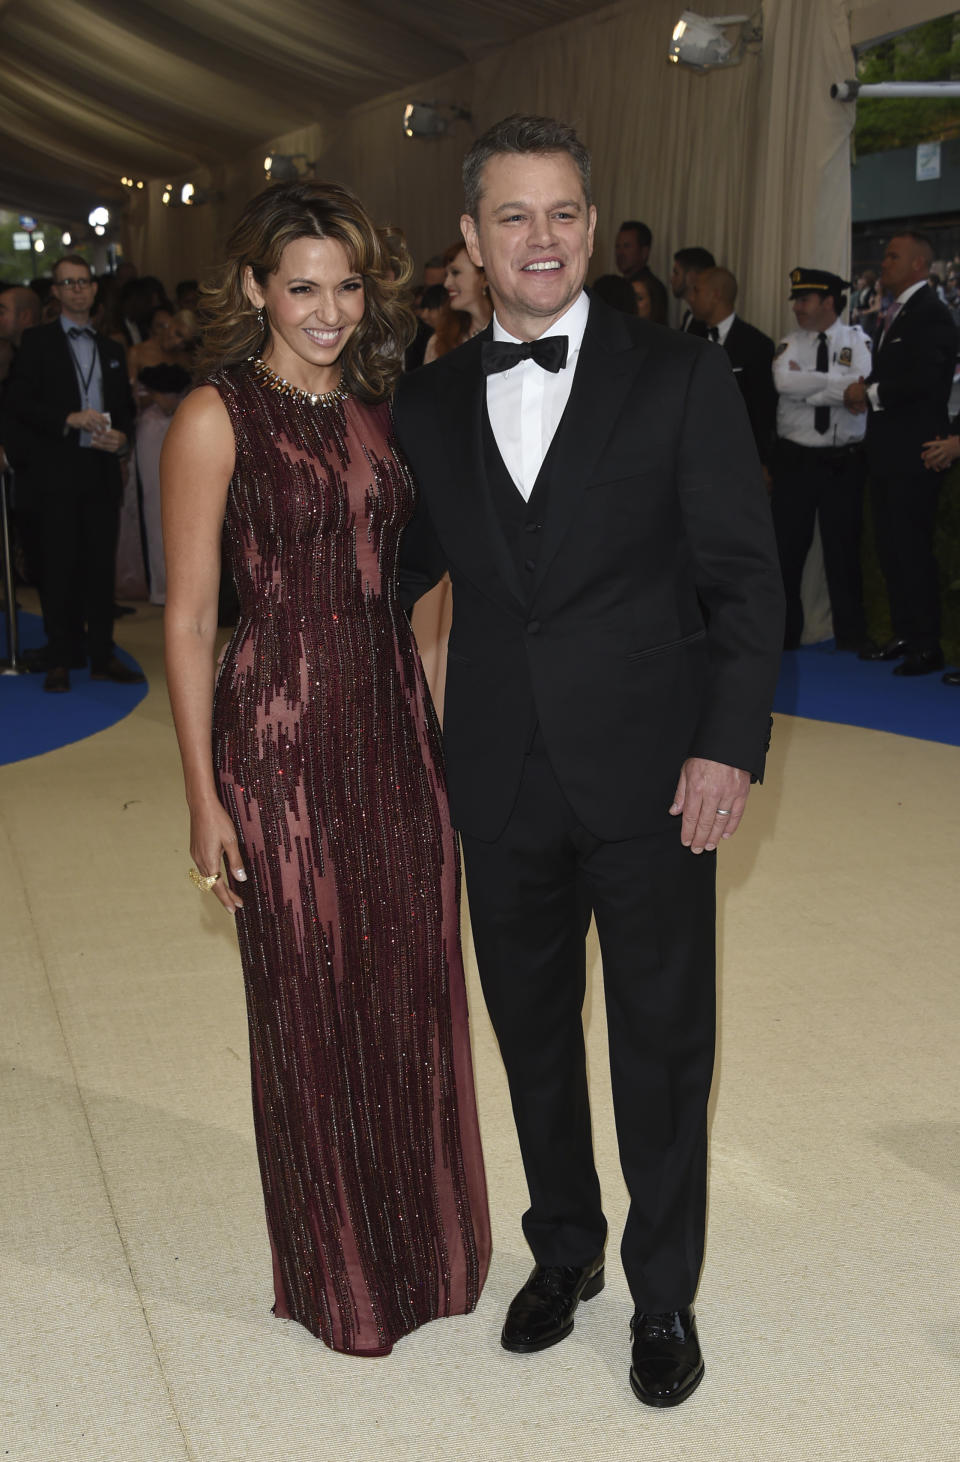 Matt Damon, right, and Luciana Barroso attend The Metropolitan Museum of Art's Costume Institute benefit gala celebrating the opening of the Rei Kawakubo/Comme des Garçons: Art of the In-Between exhibition on Monday, May 1, 2017, in New York. (Photo by Evan Agostini/Invision/AP)